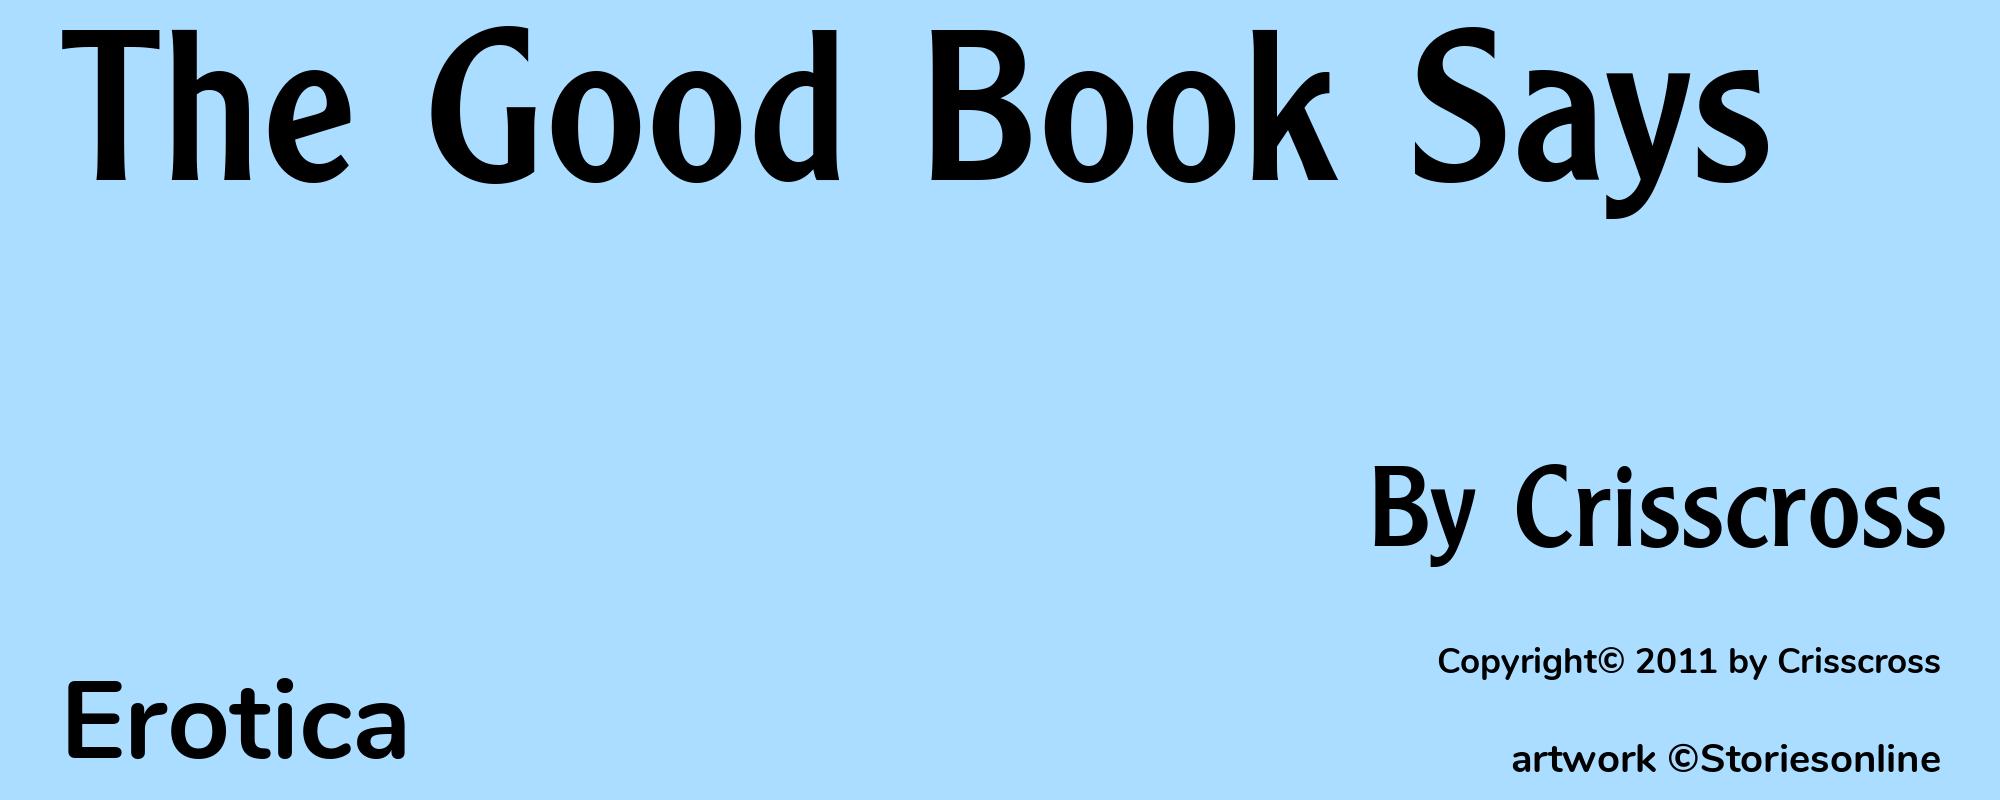 The Good Book Says - Cover